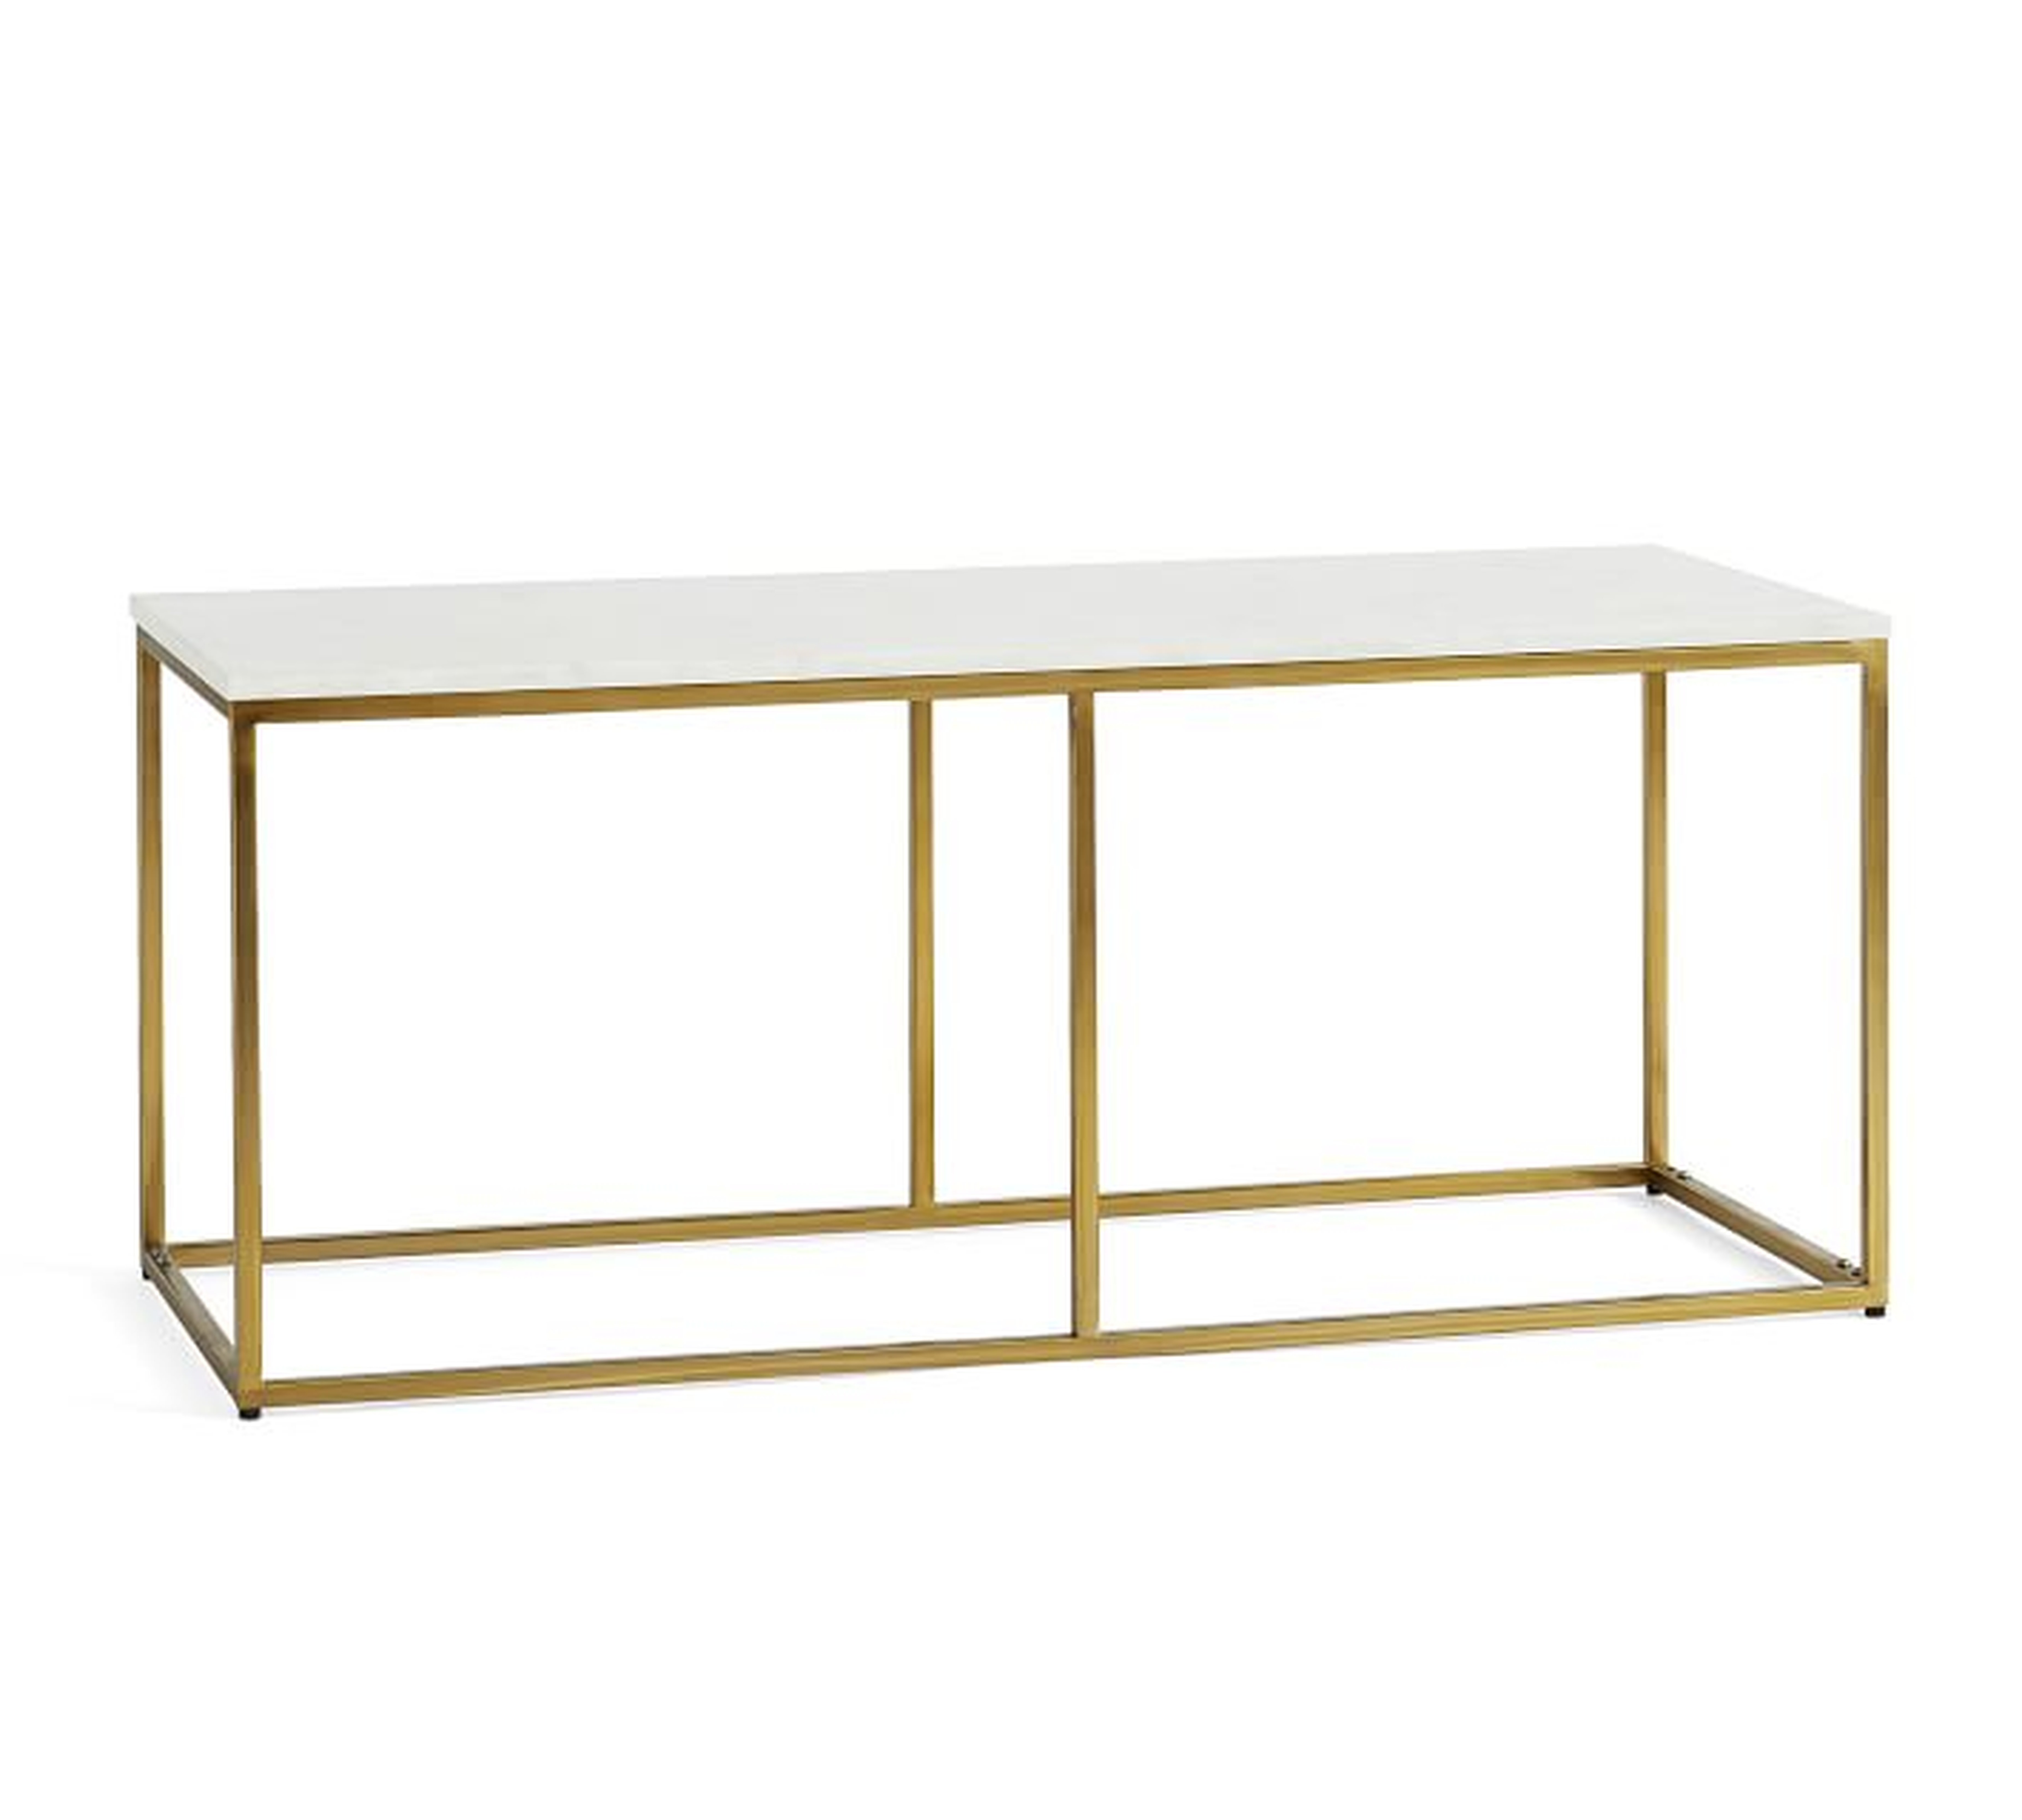 Delaney Rectangular Coffee Table, White Marble - Pottery Barn